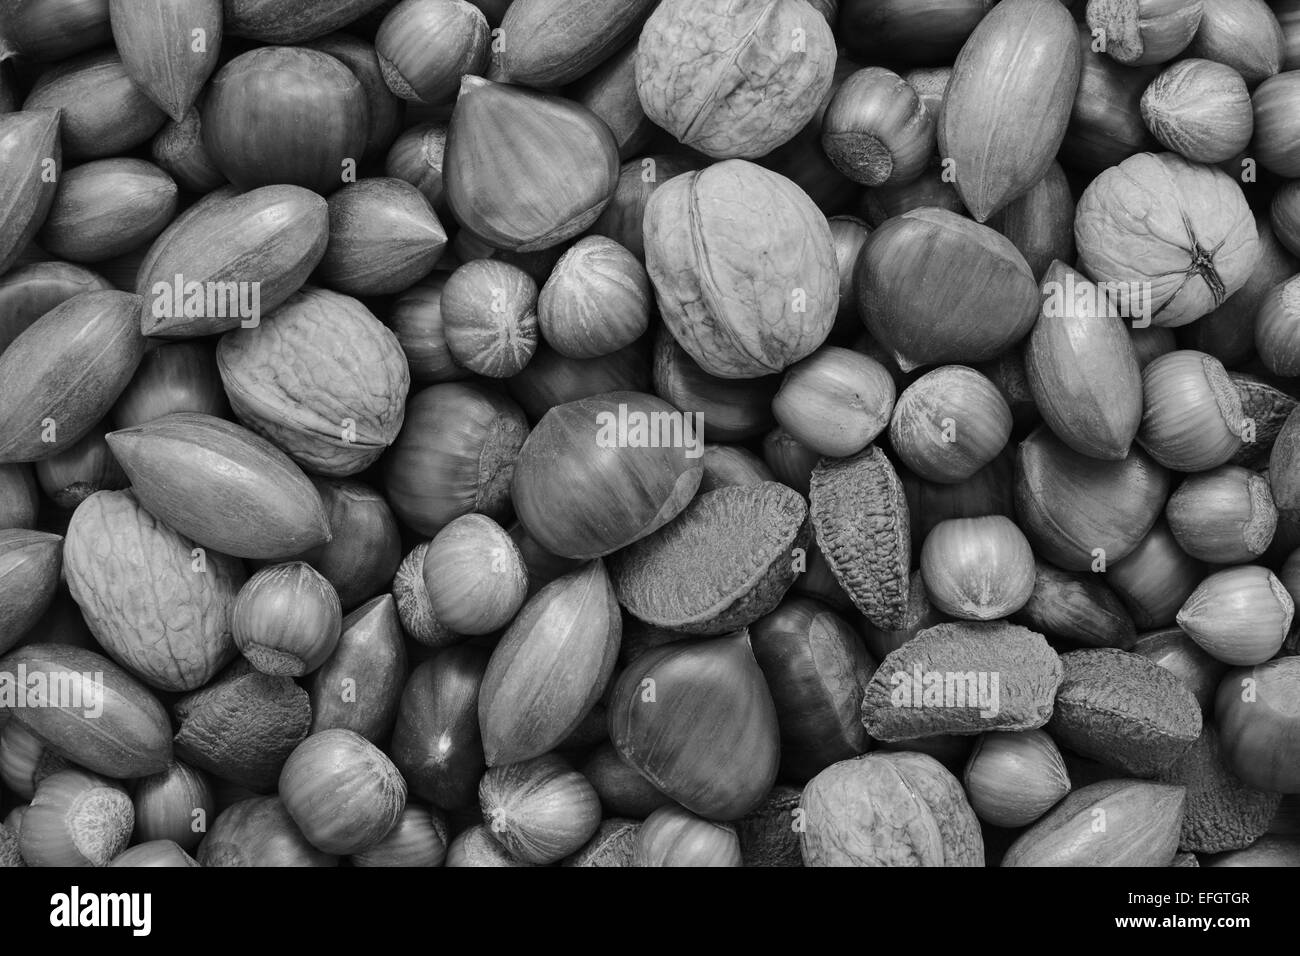 Mixed nuts - chestnuts, pecans, walnuts, brazils and hazelnuts - as an abstract background texture Stock Photo